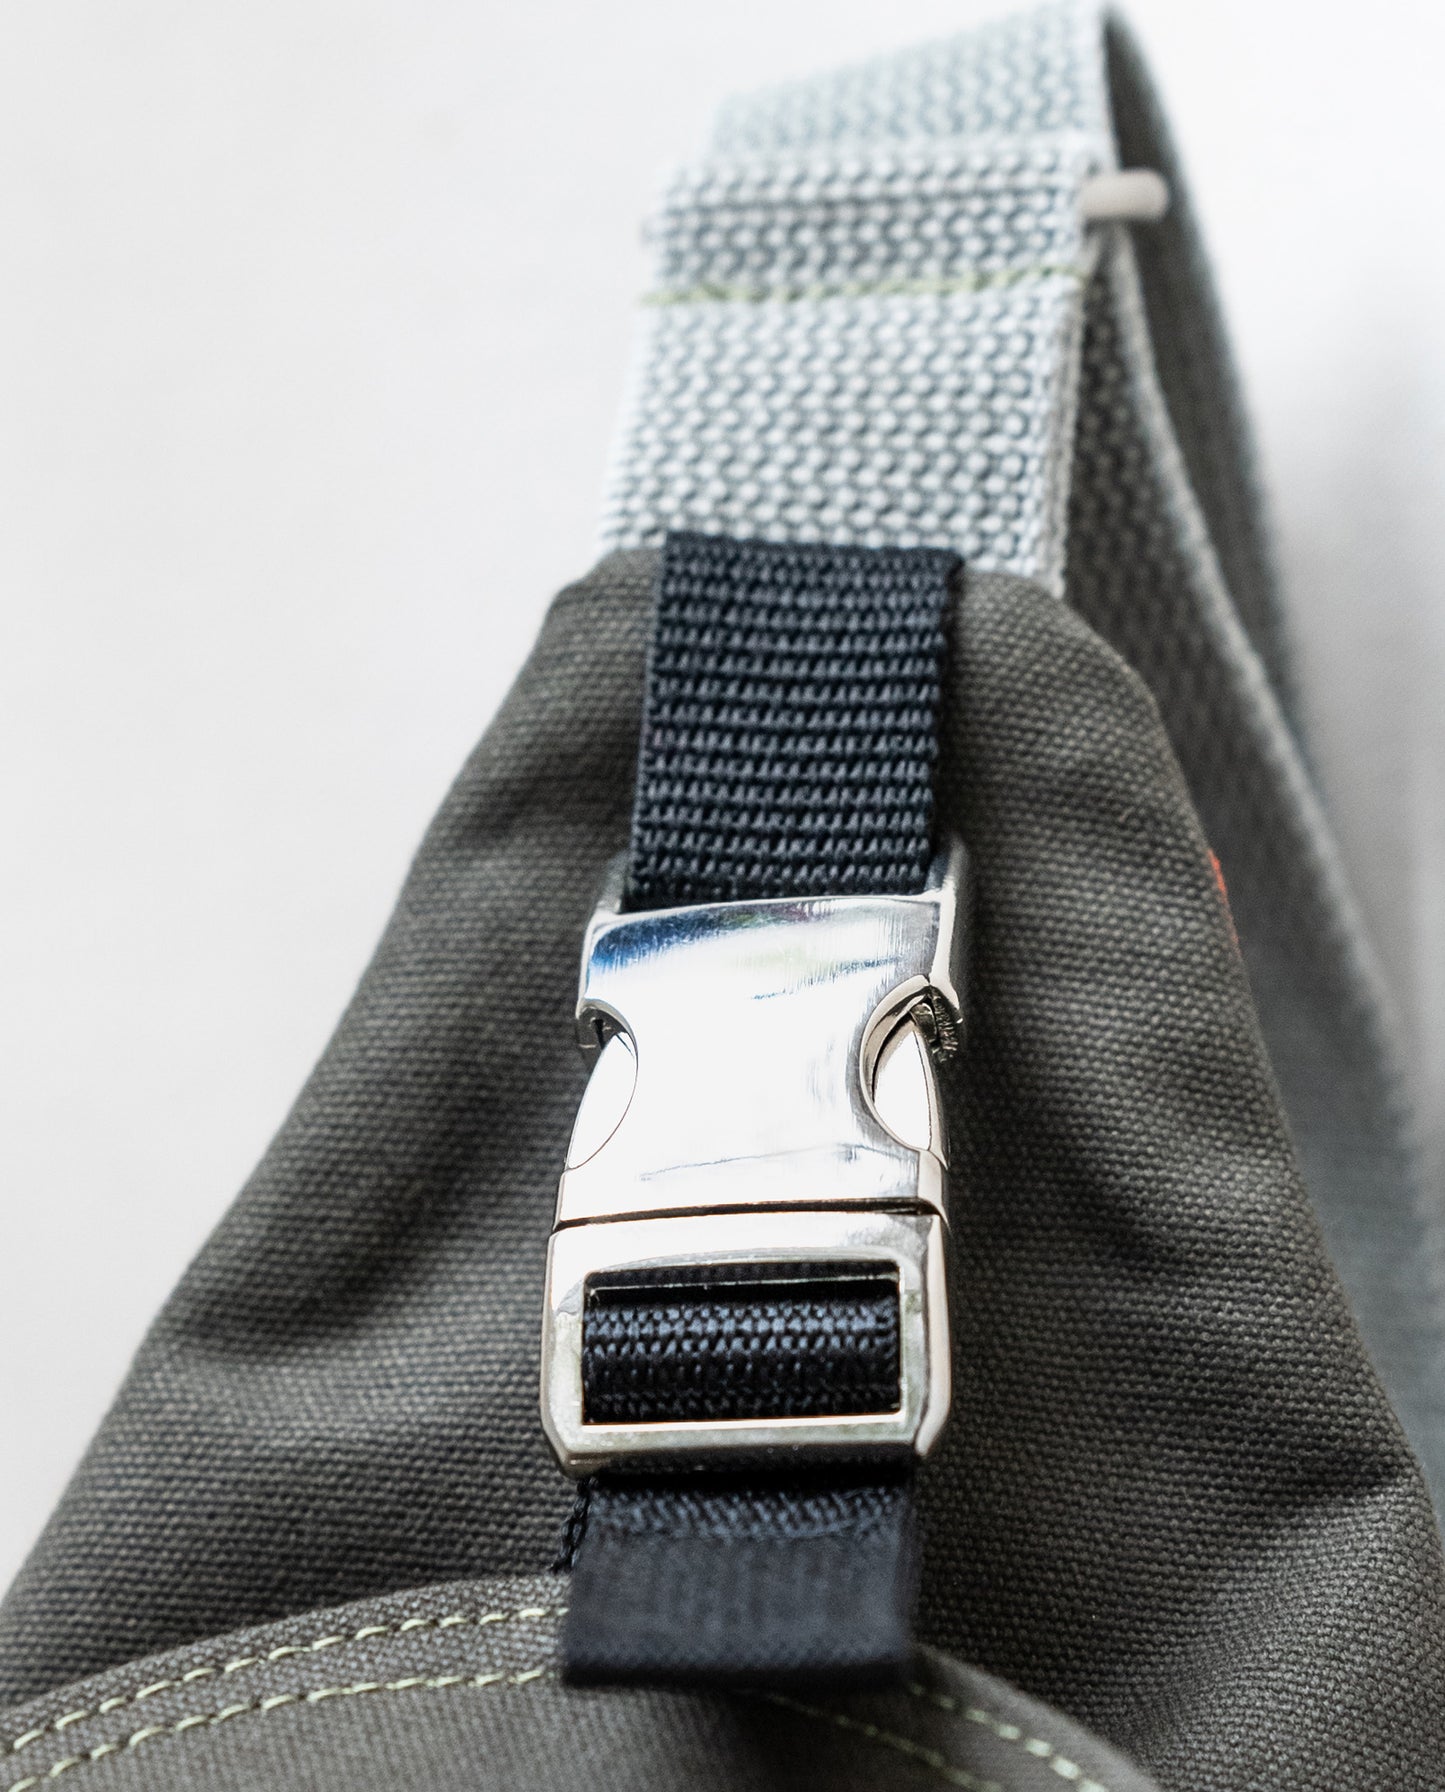 An aluminum side-squeeze buckle secures the front flap of Dock 5’s spacious, hand-sewn Lupine Canvas Sling Bag